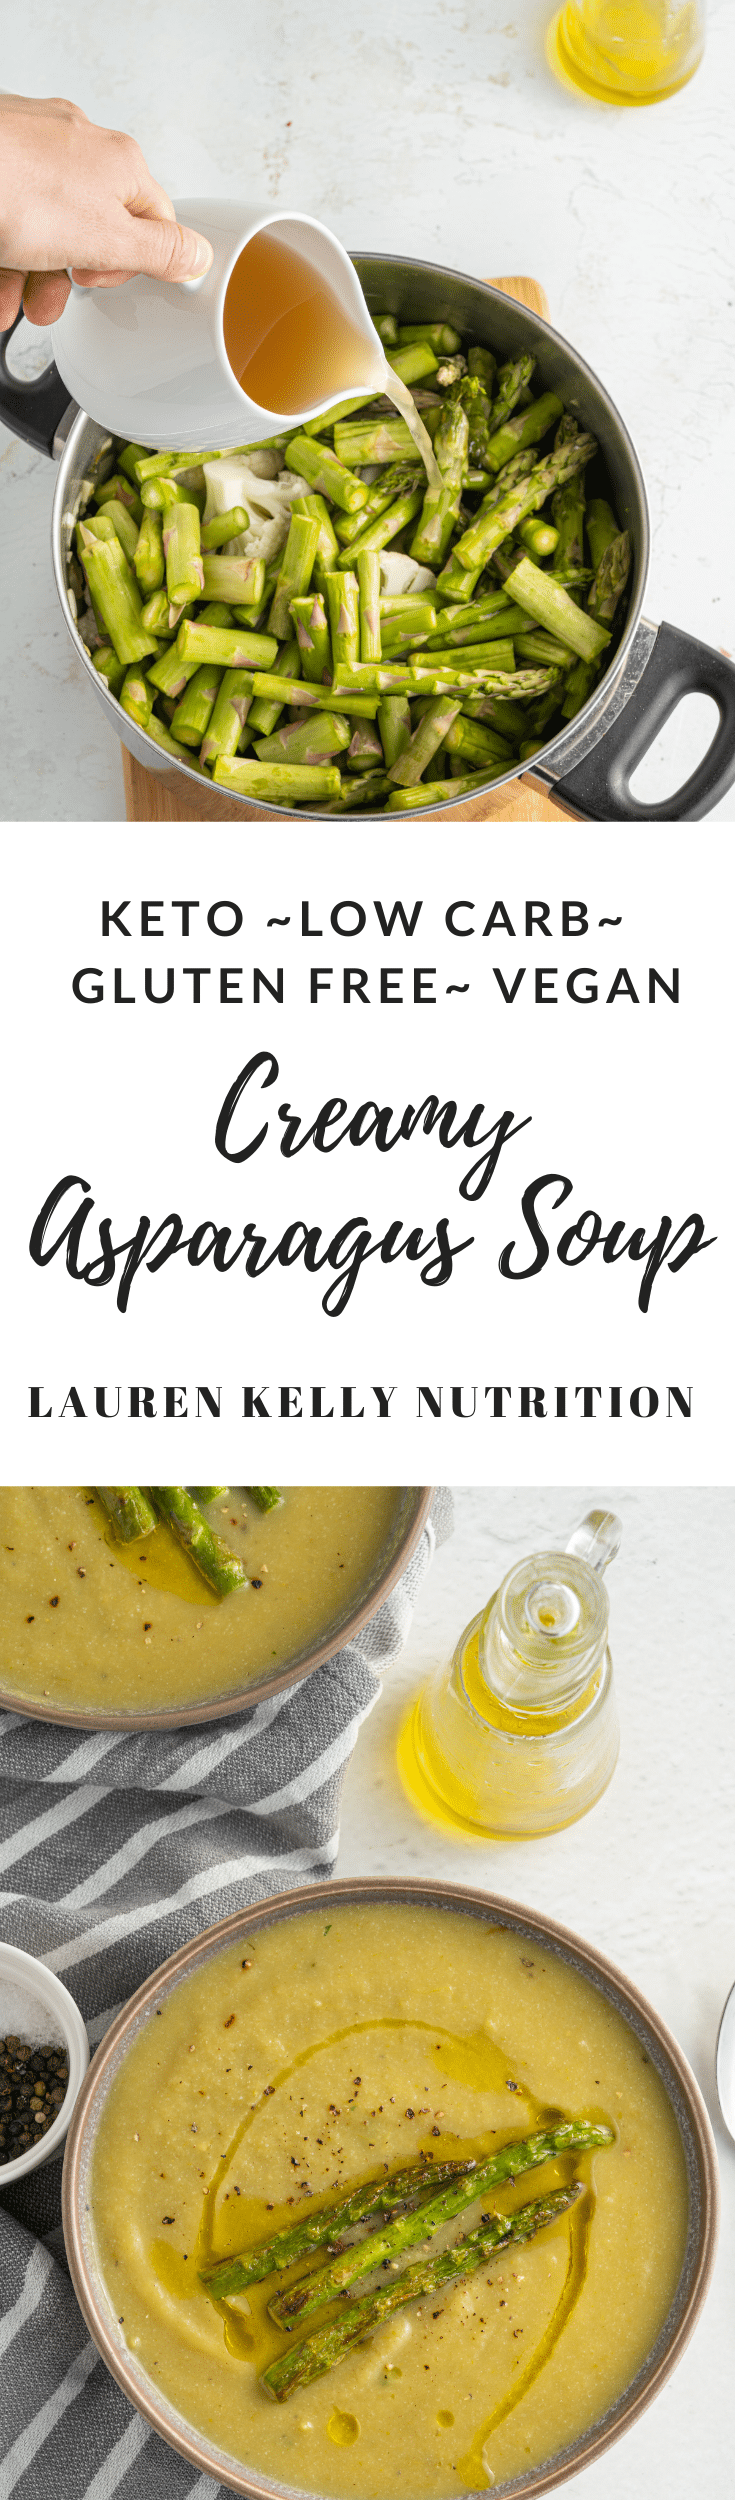 This delicious creamy asparagus soup is so simple to make, healthy, gluten free, dairy free, vegan and low carb, all with no cream in it!